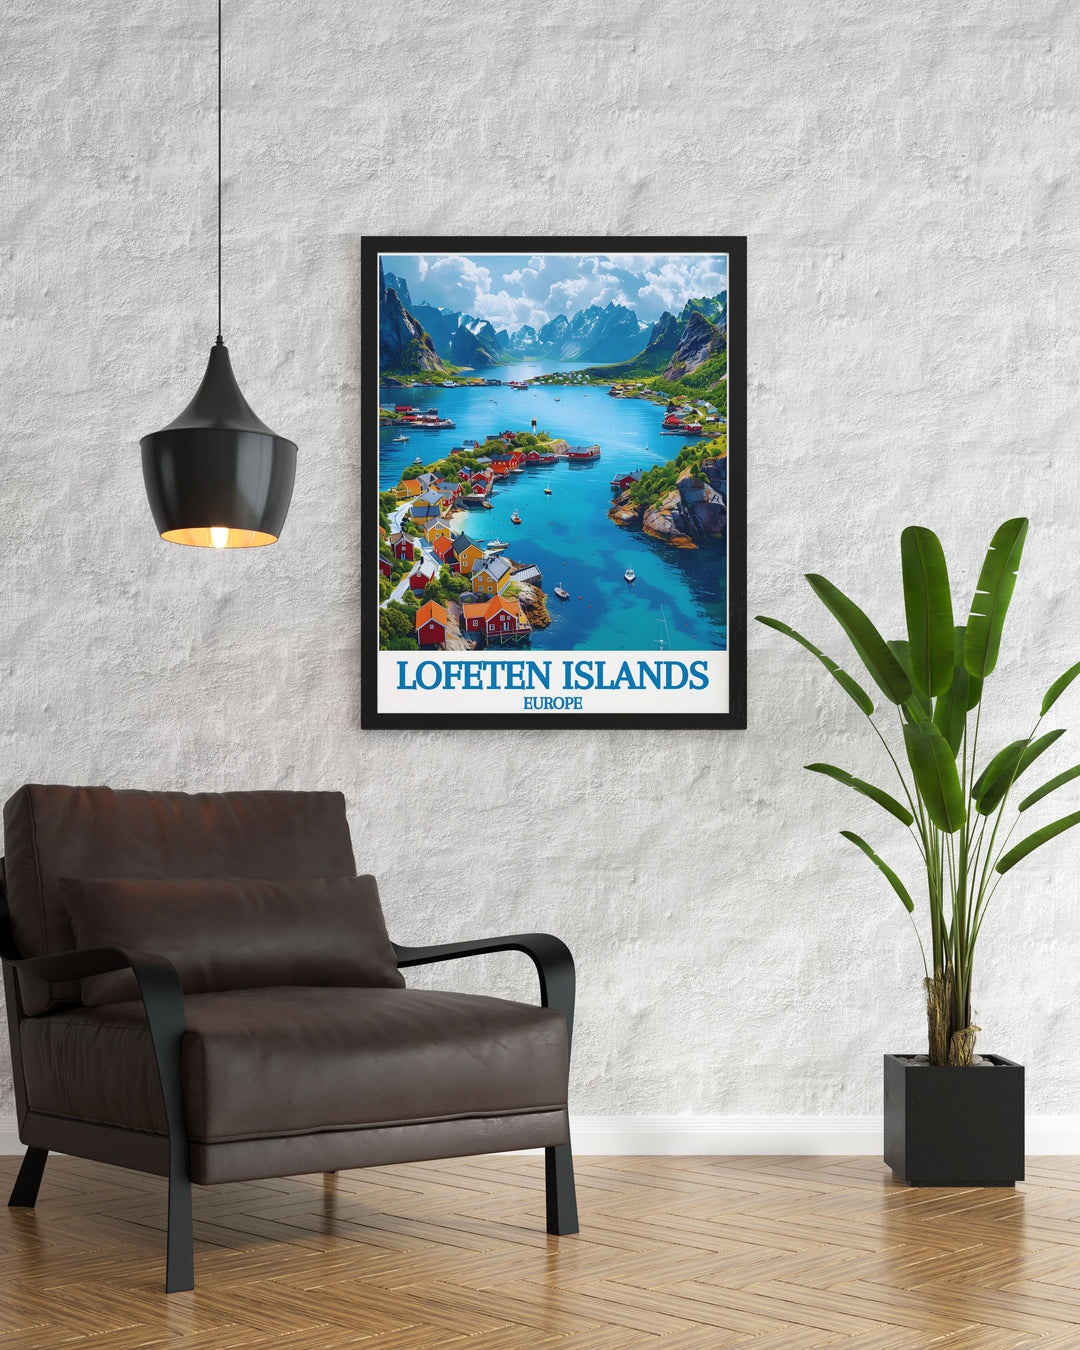 Modern wall decor showcasing the picturesque landscapes of the Lofoten Islands, Norway. The print highlights the serene fishing village of Henningsvær, the dramatic mountains, and the clear fjord, offering a contemporary touch of Nordic beauty for any living space. The detailed illustration and vivid colors make this modern wall decor a perfect addition to any home.